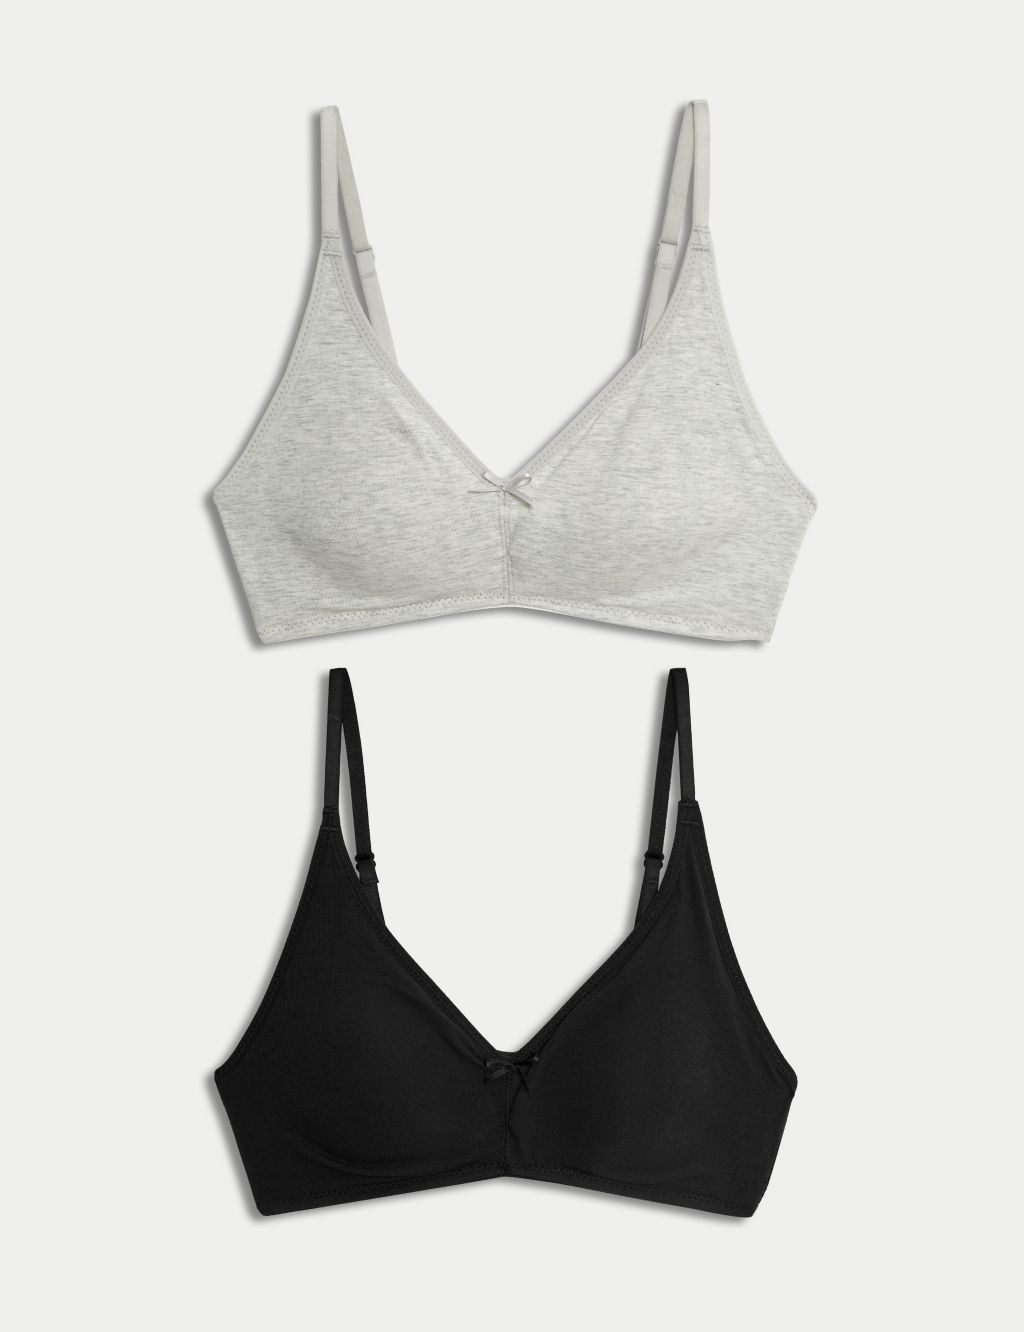 2pk Non-Wired Bralette First Bra AA-D image 1